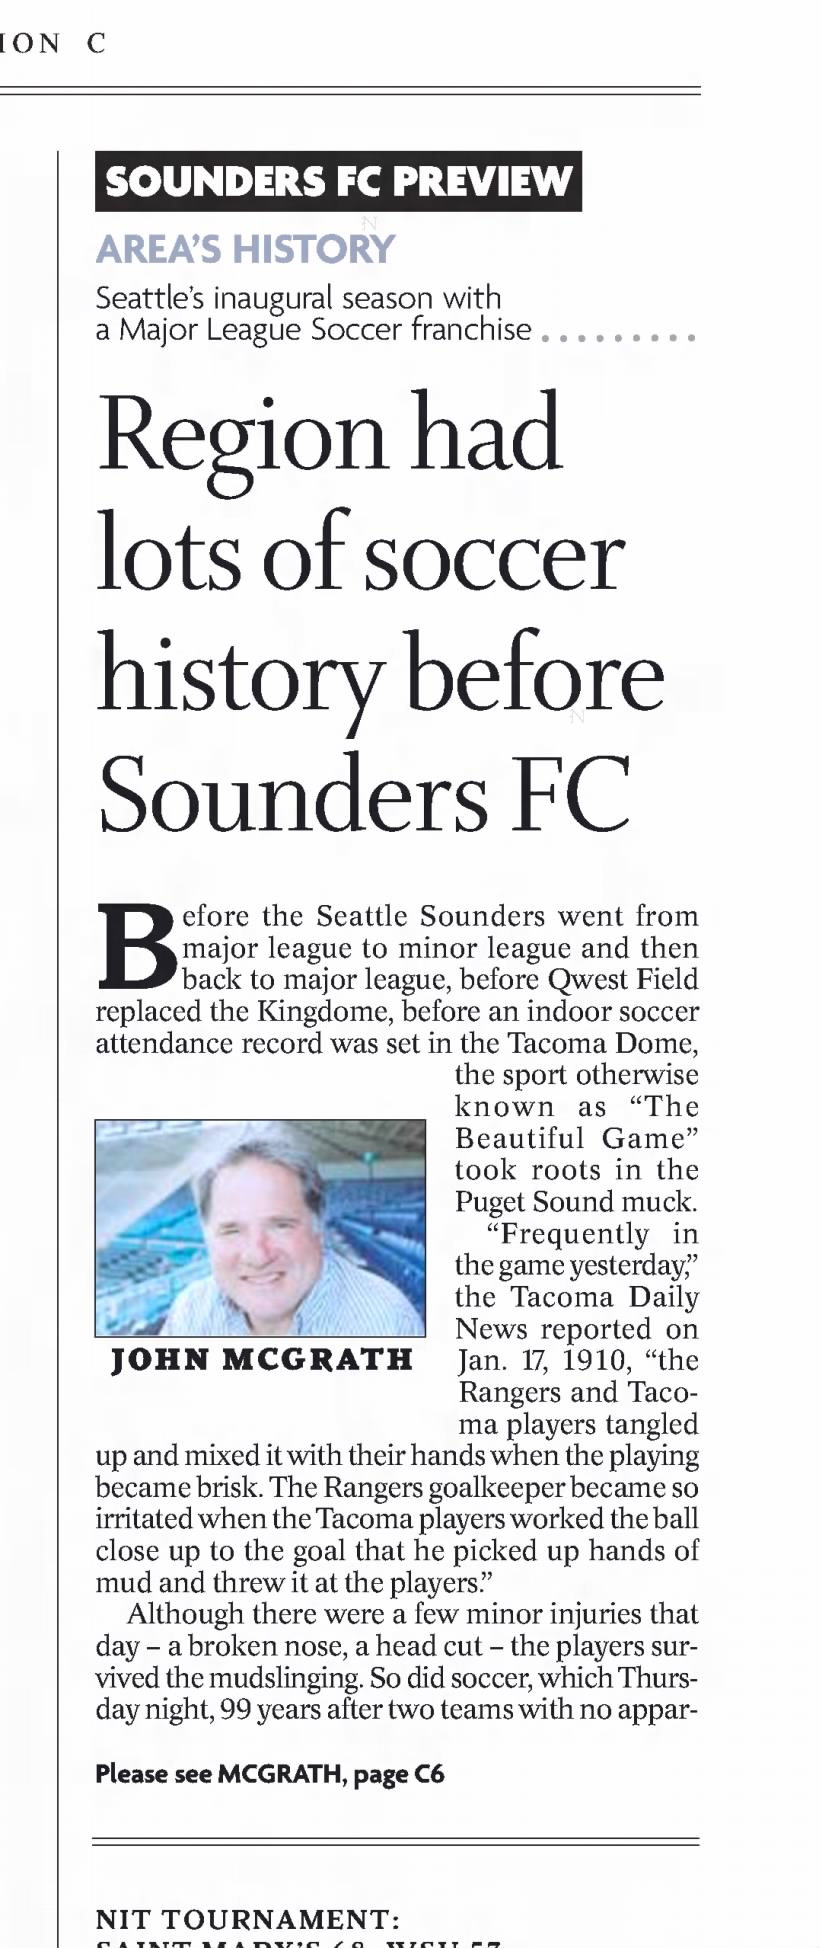 Region had lots of soccer history before Sounders FC